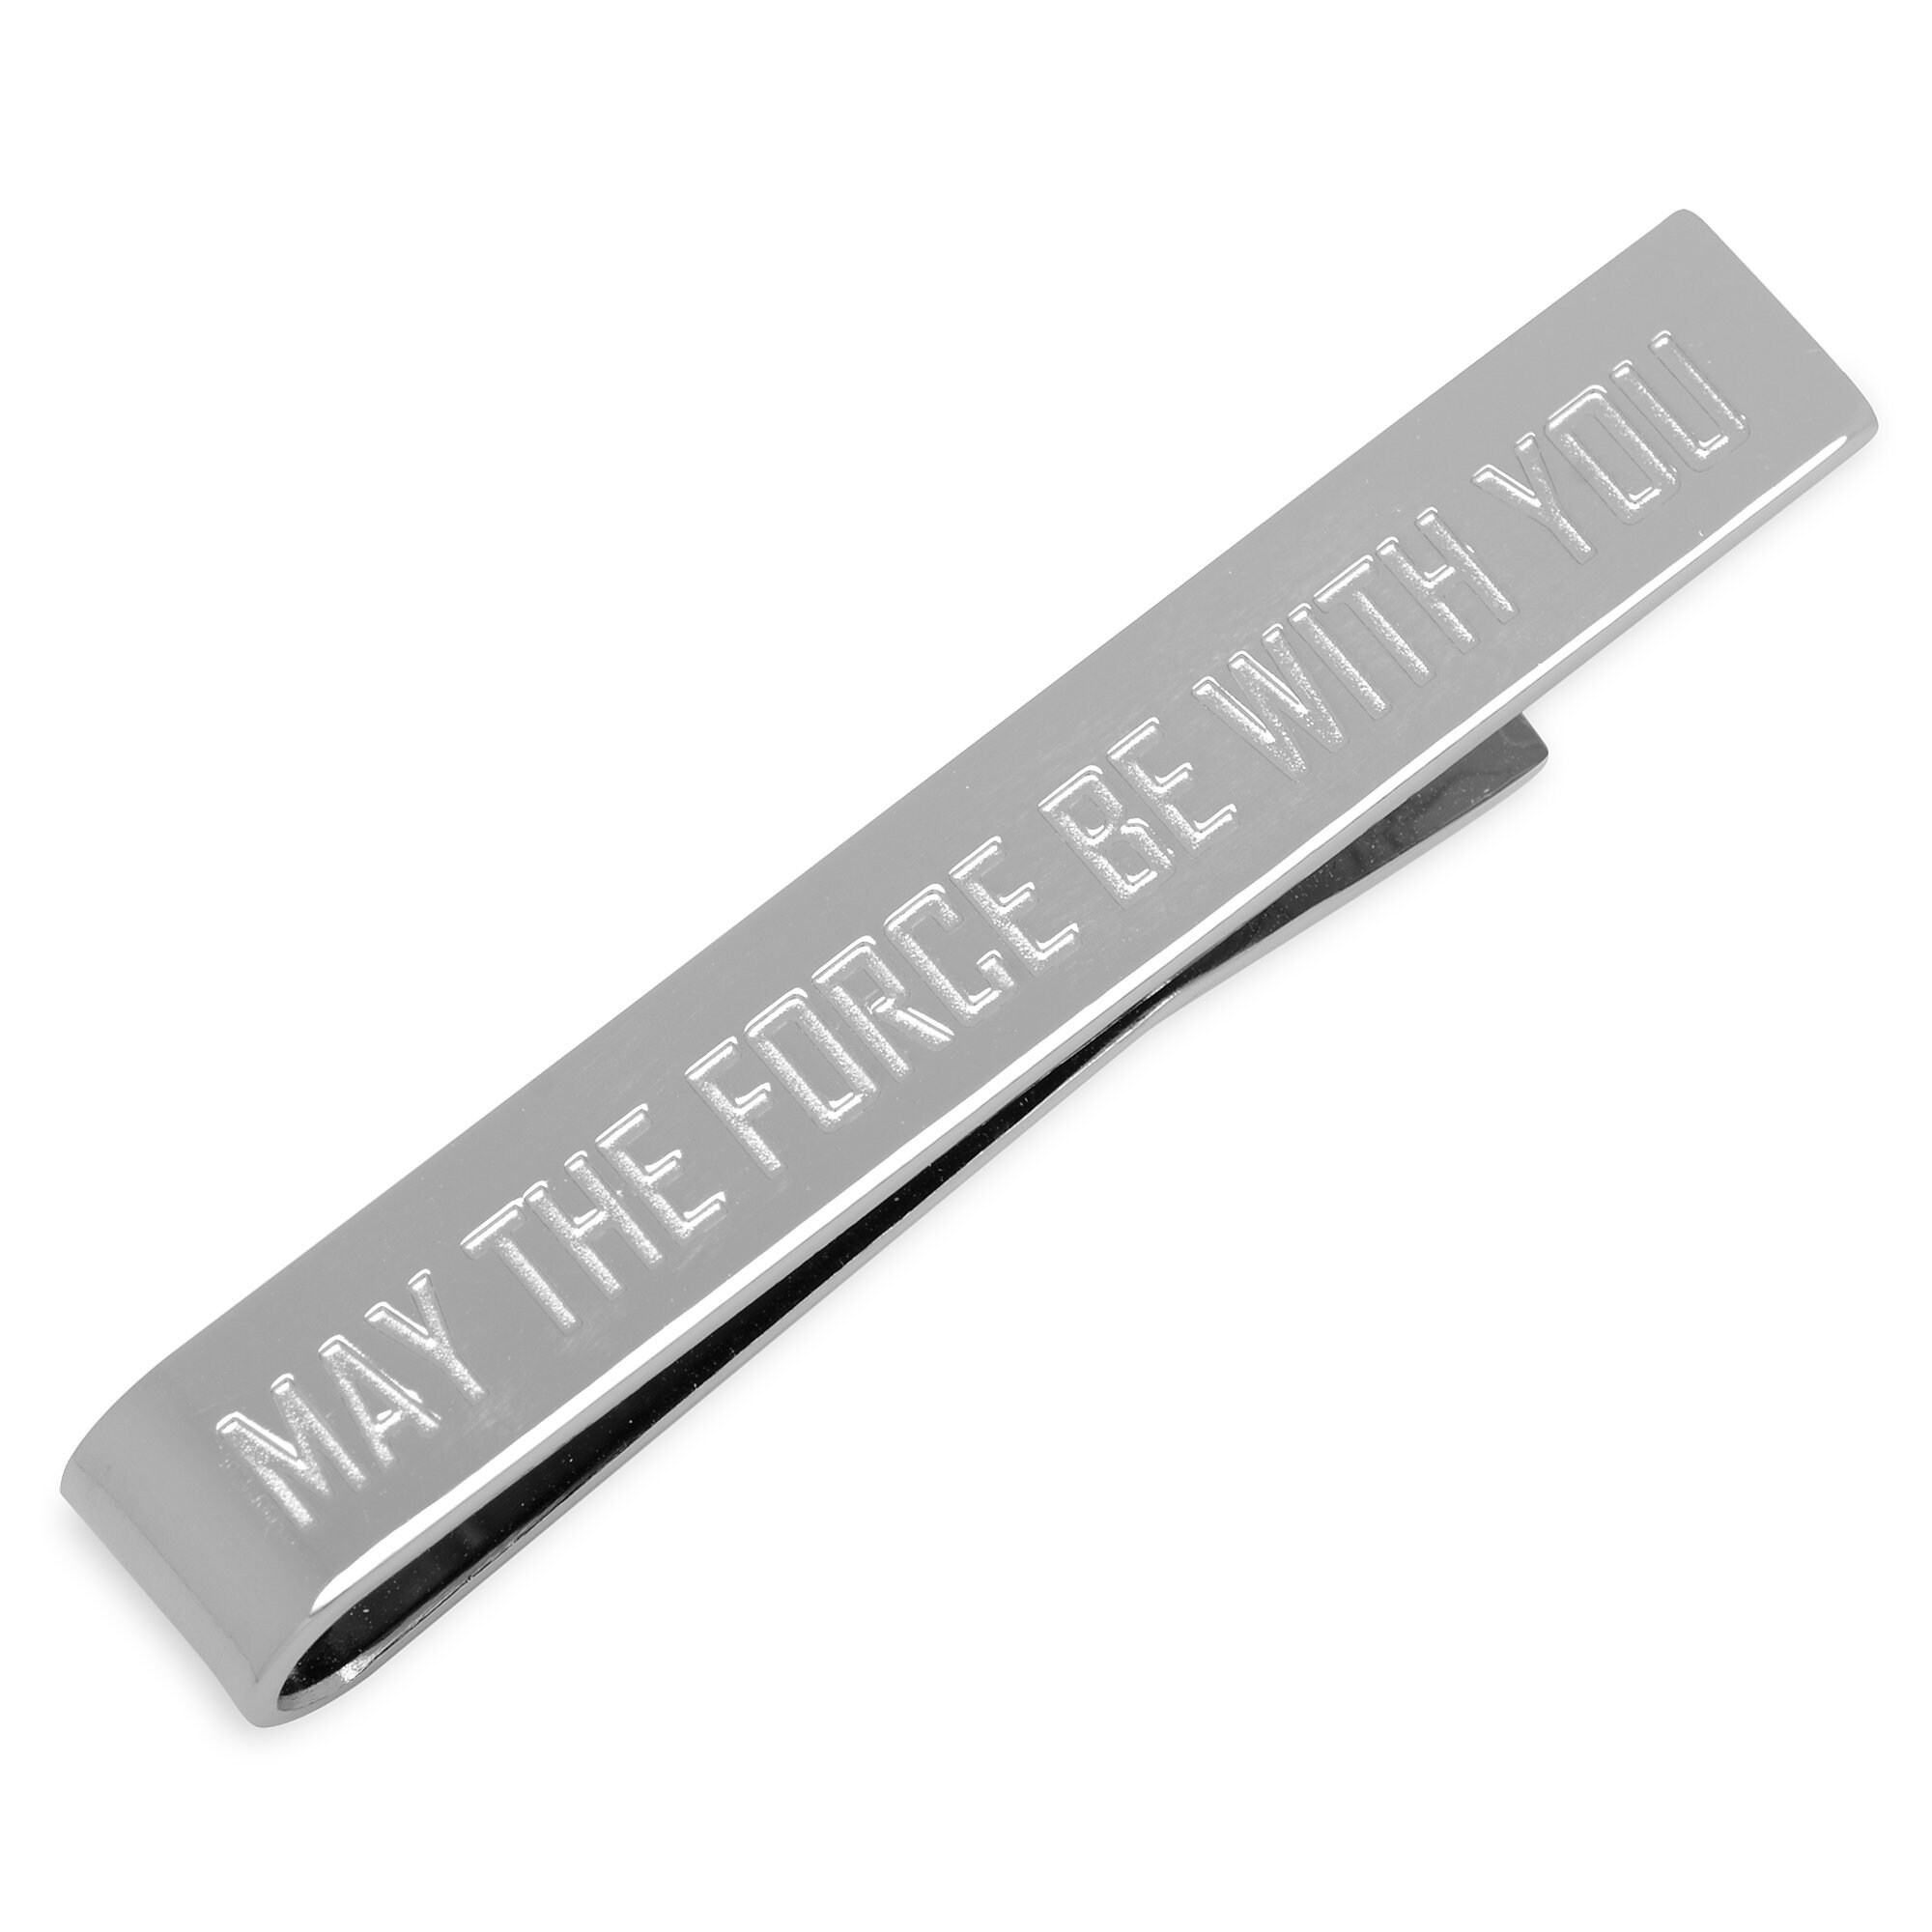 ''May the Force Be With You'' Tie Clip - Star Wars